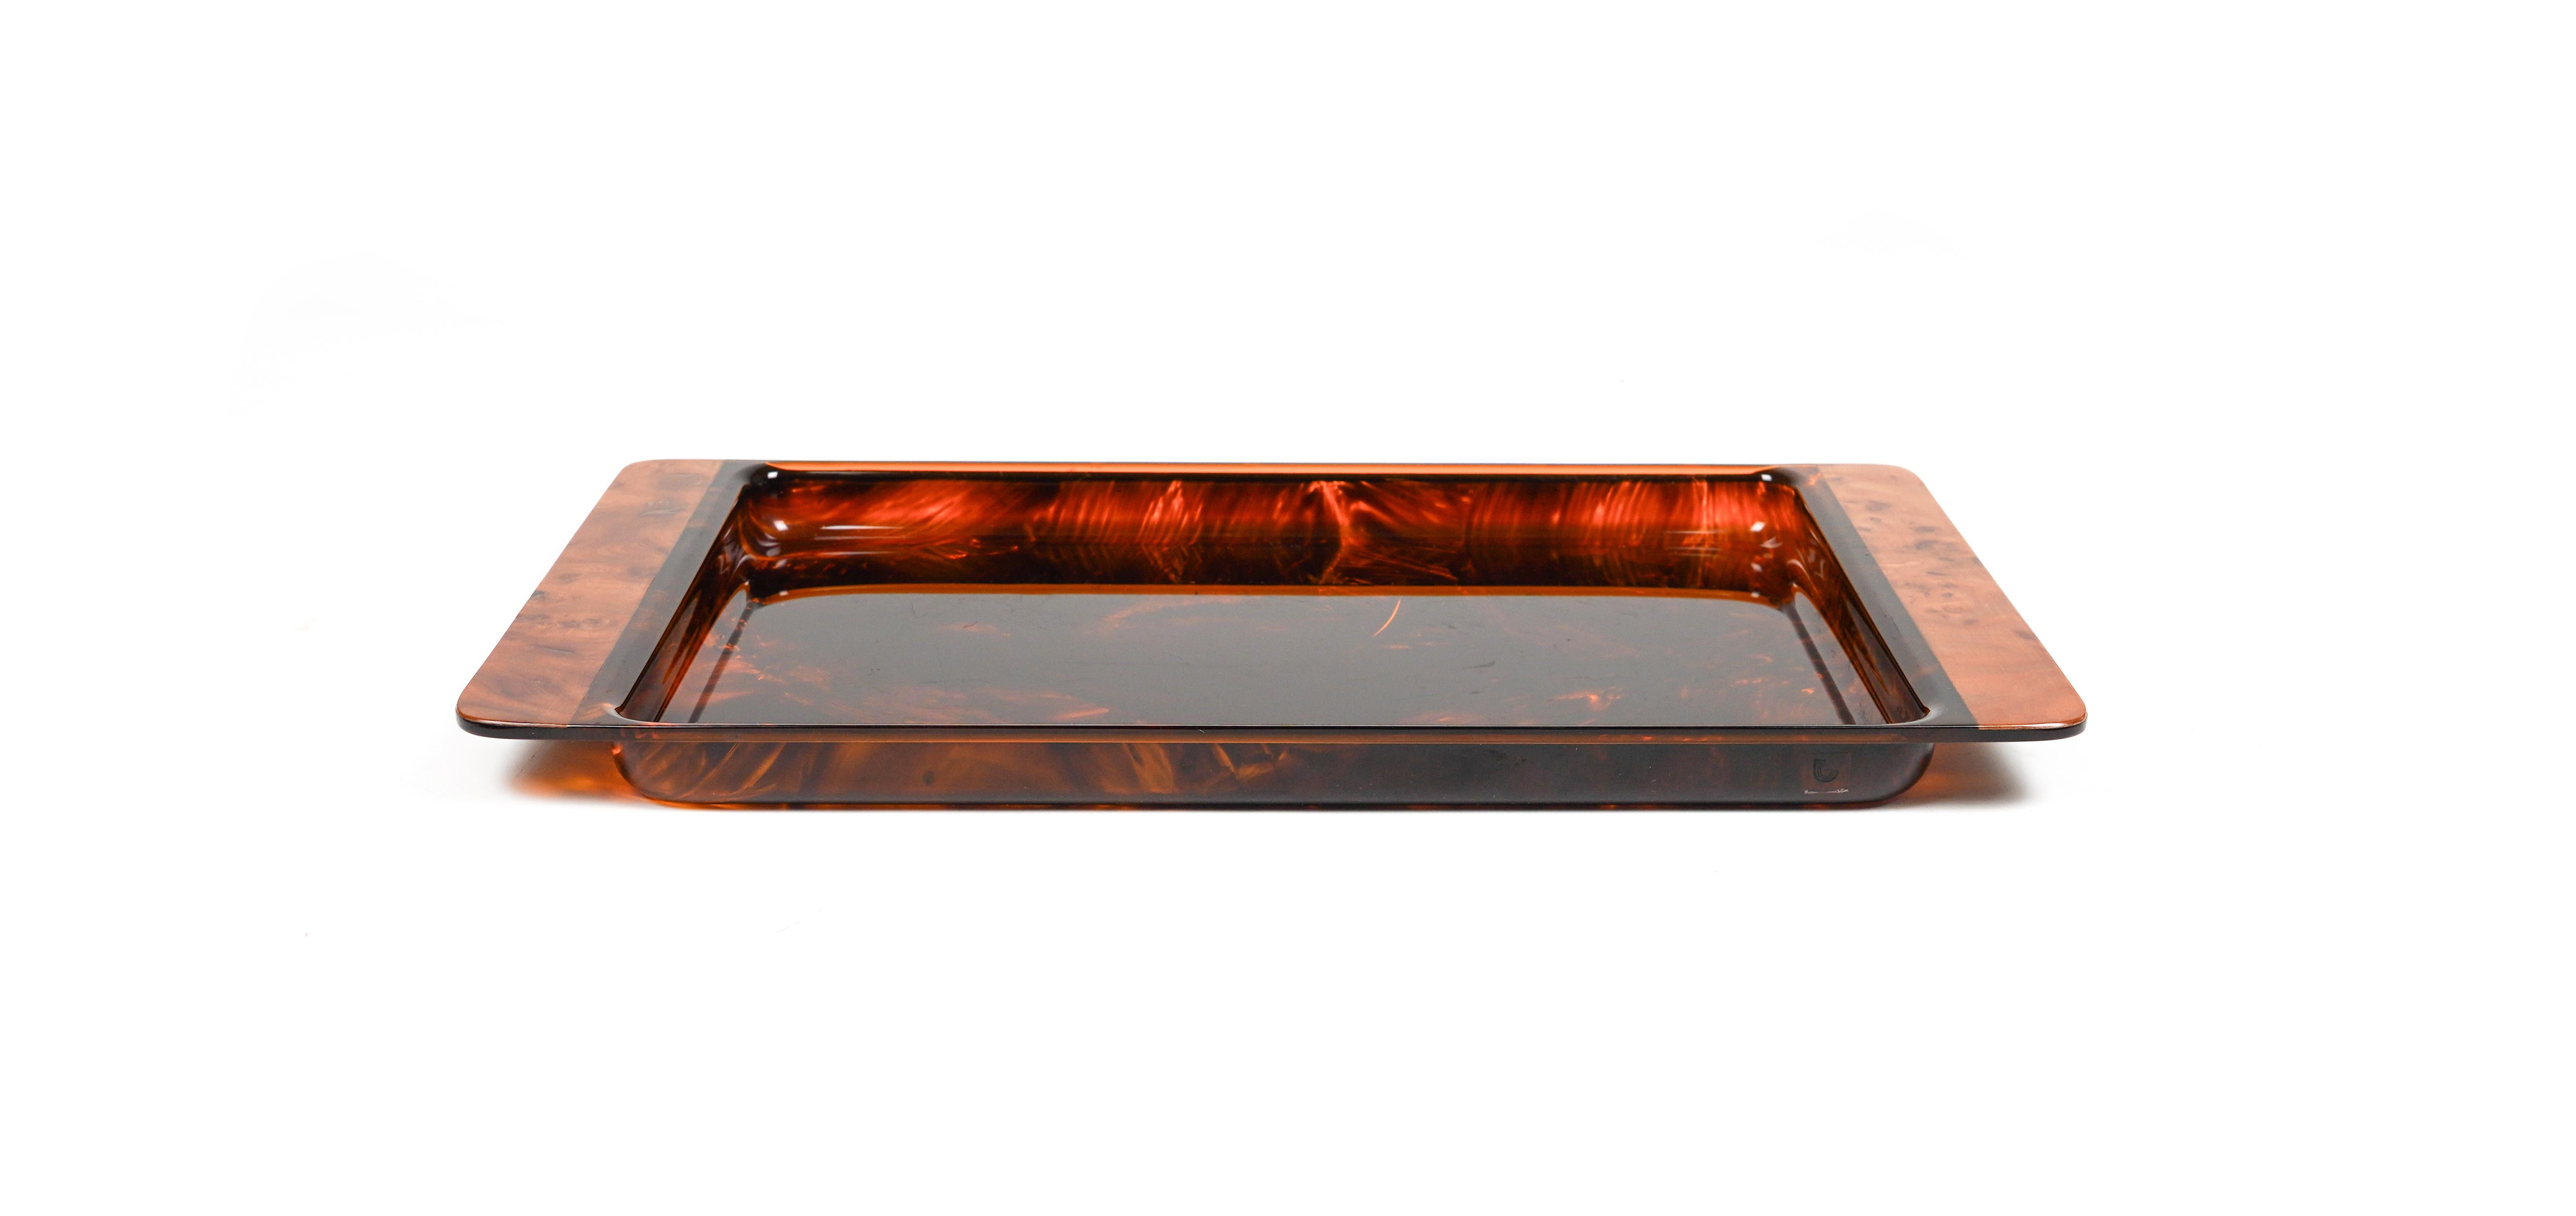 Italian Serving Tray in Effect Tortoiseshell Lucite & Brass by Guzzini, Italy 1970s